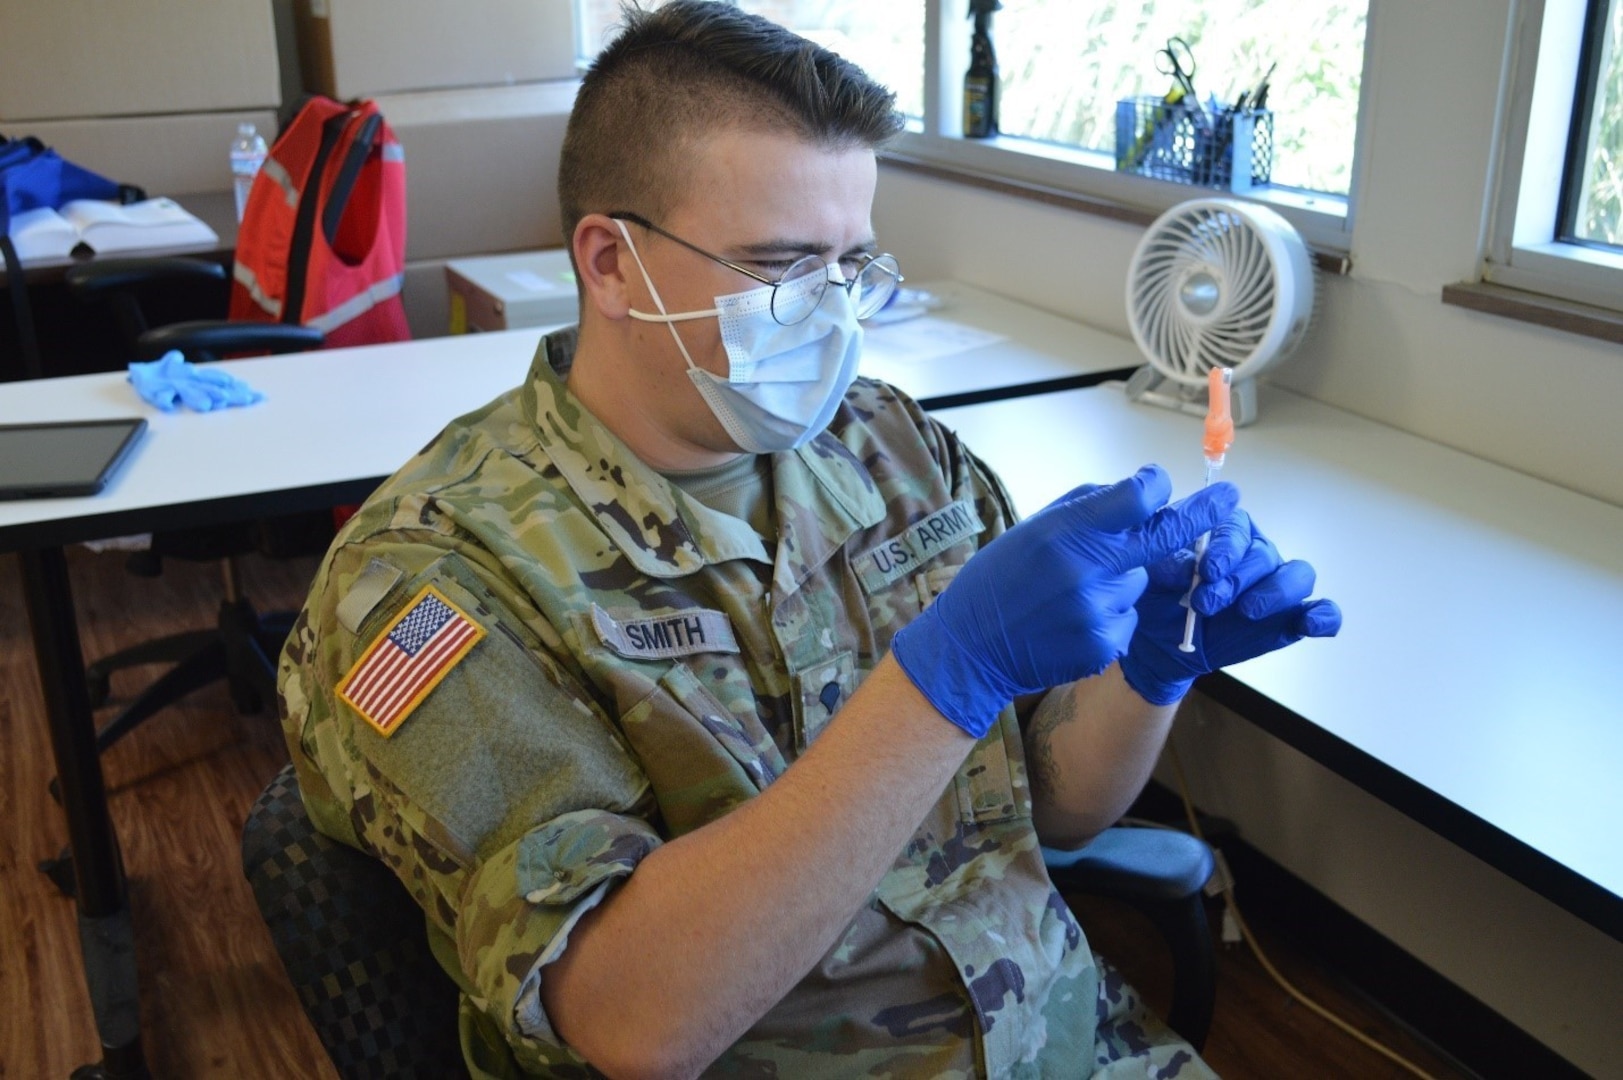 Spc. Alexander Smith, a combat medic with the 230th Sustainment Brigade, prepares a COVID-19 vaccine in Cleveland, Tenn. Smith has participated in the testing and vaccination phases of the Tennessee National Guard’s COVID-19 task force mission since March 2020.